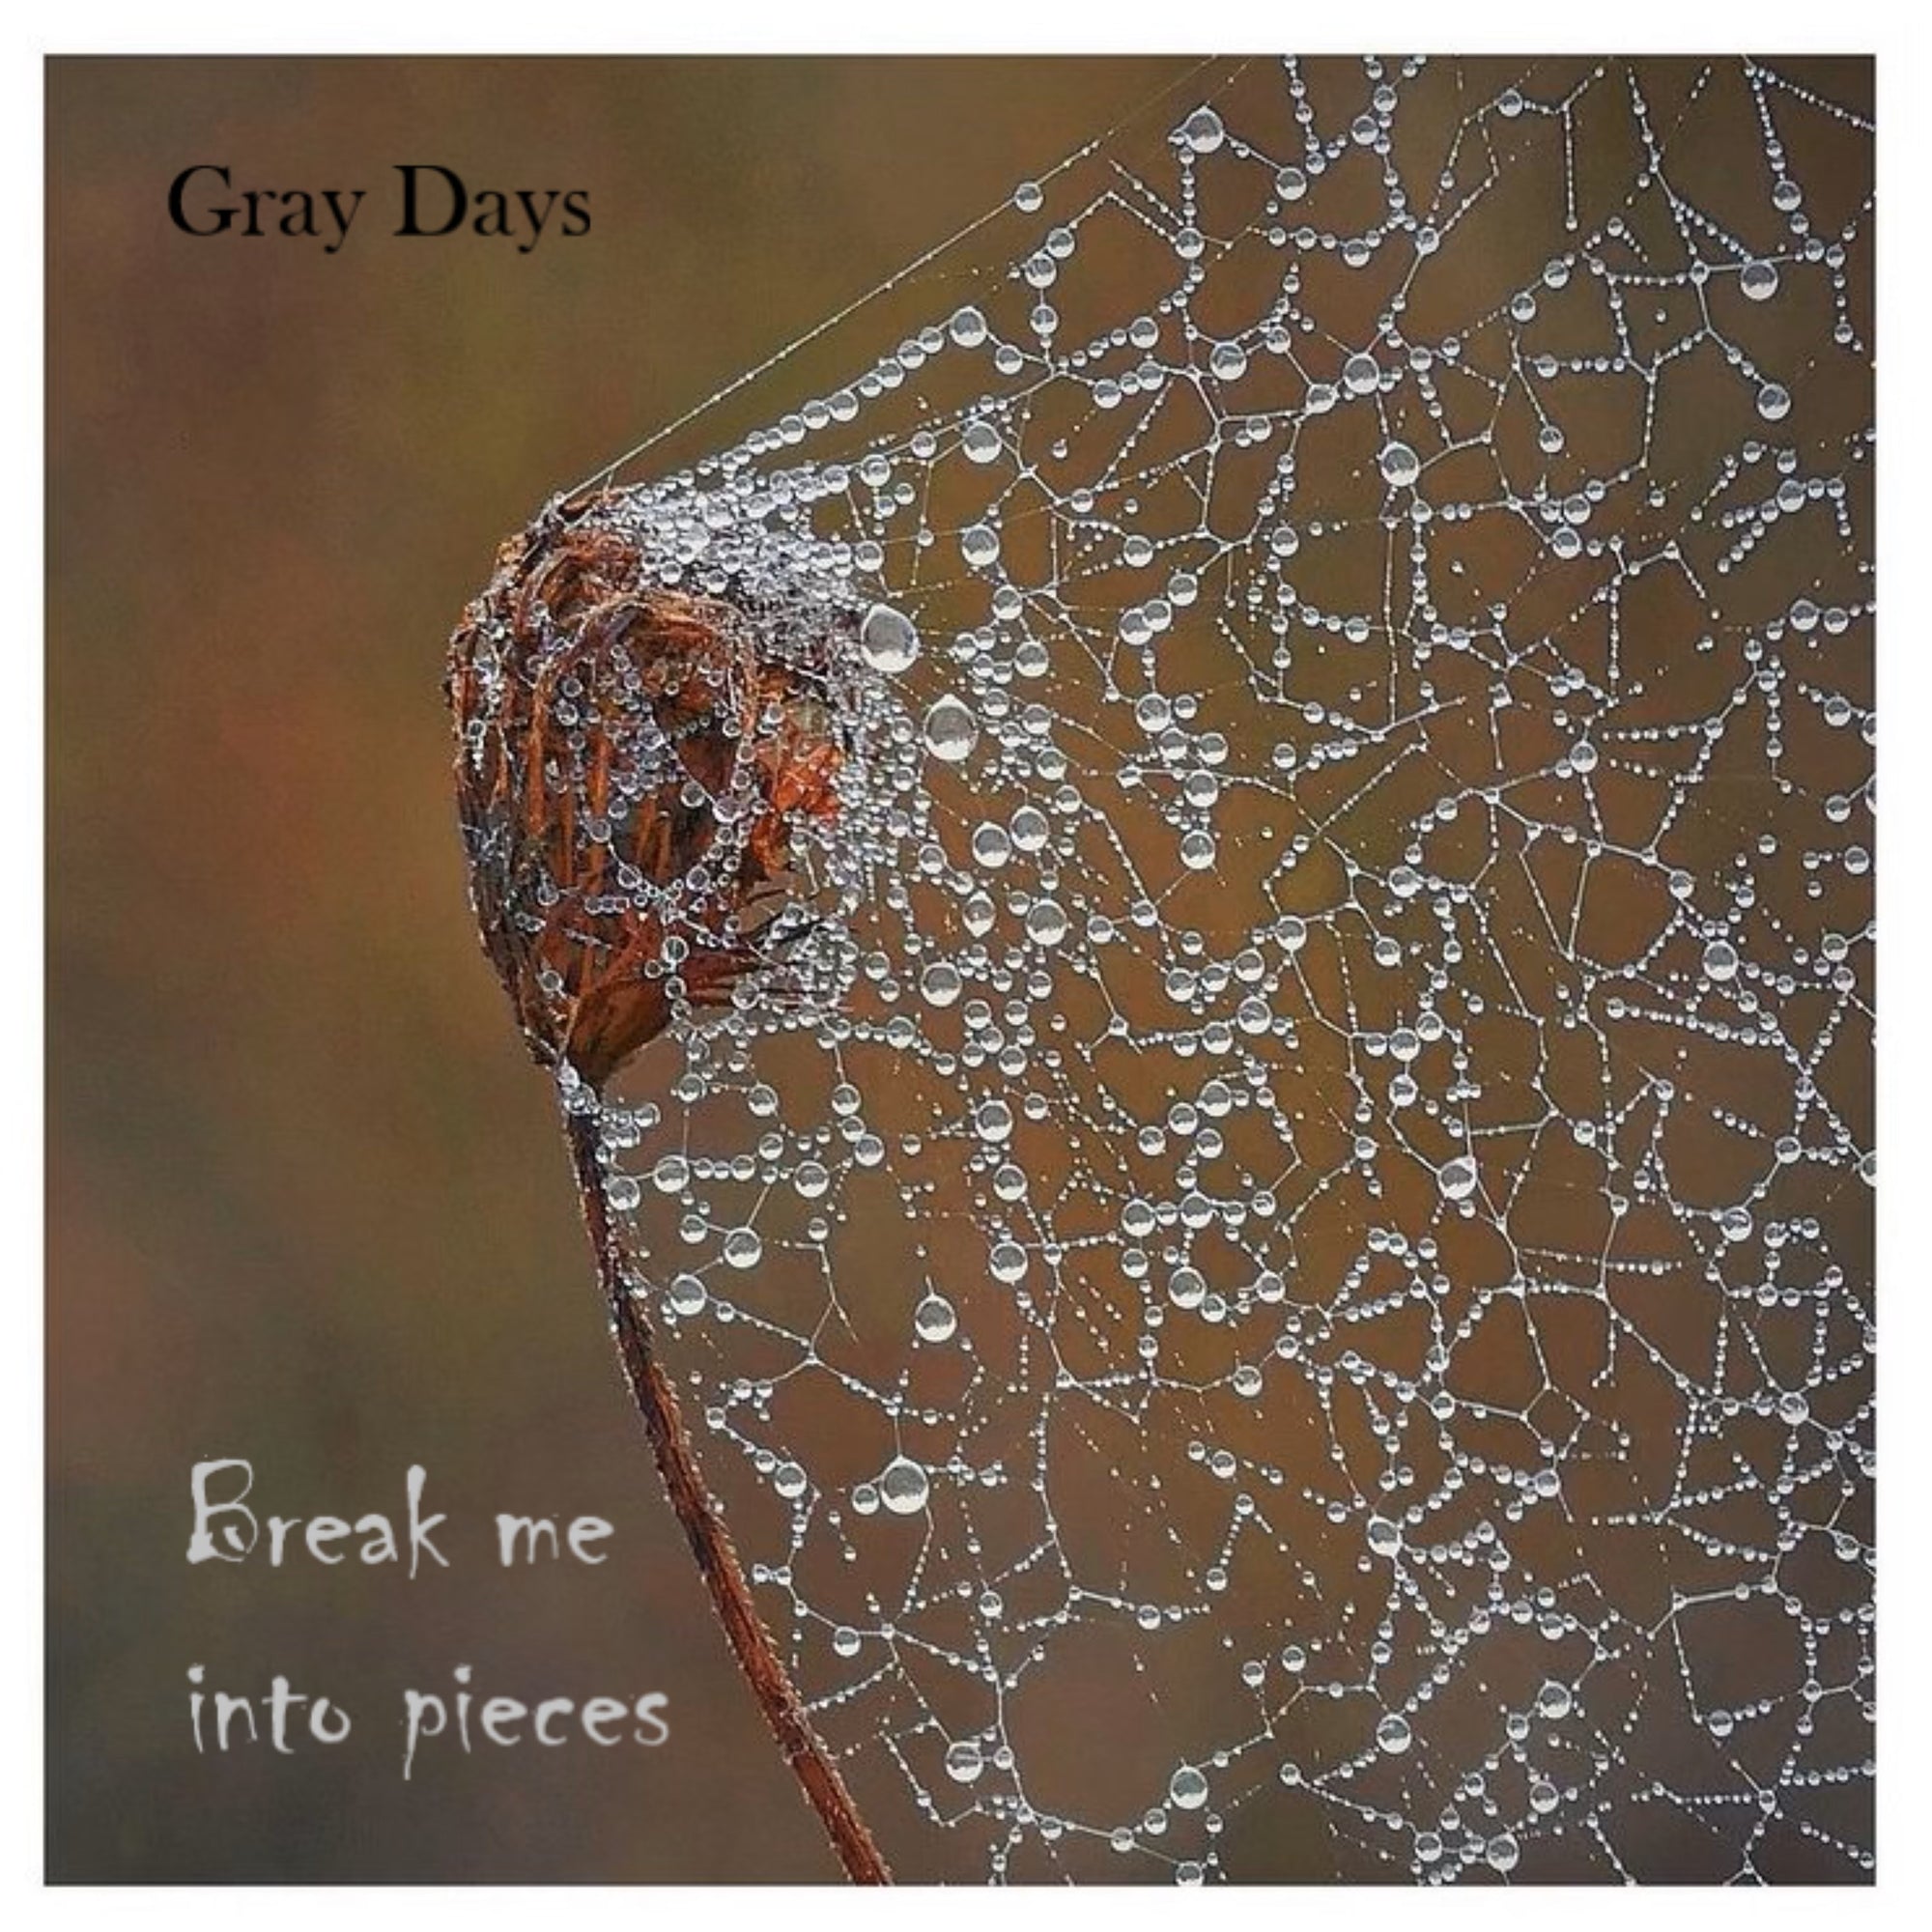 Gray Days continues to create honest, emotional moments in ‘Break Me Into Pieces’